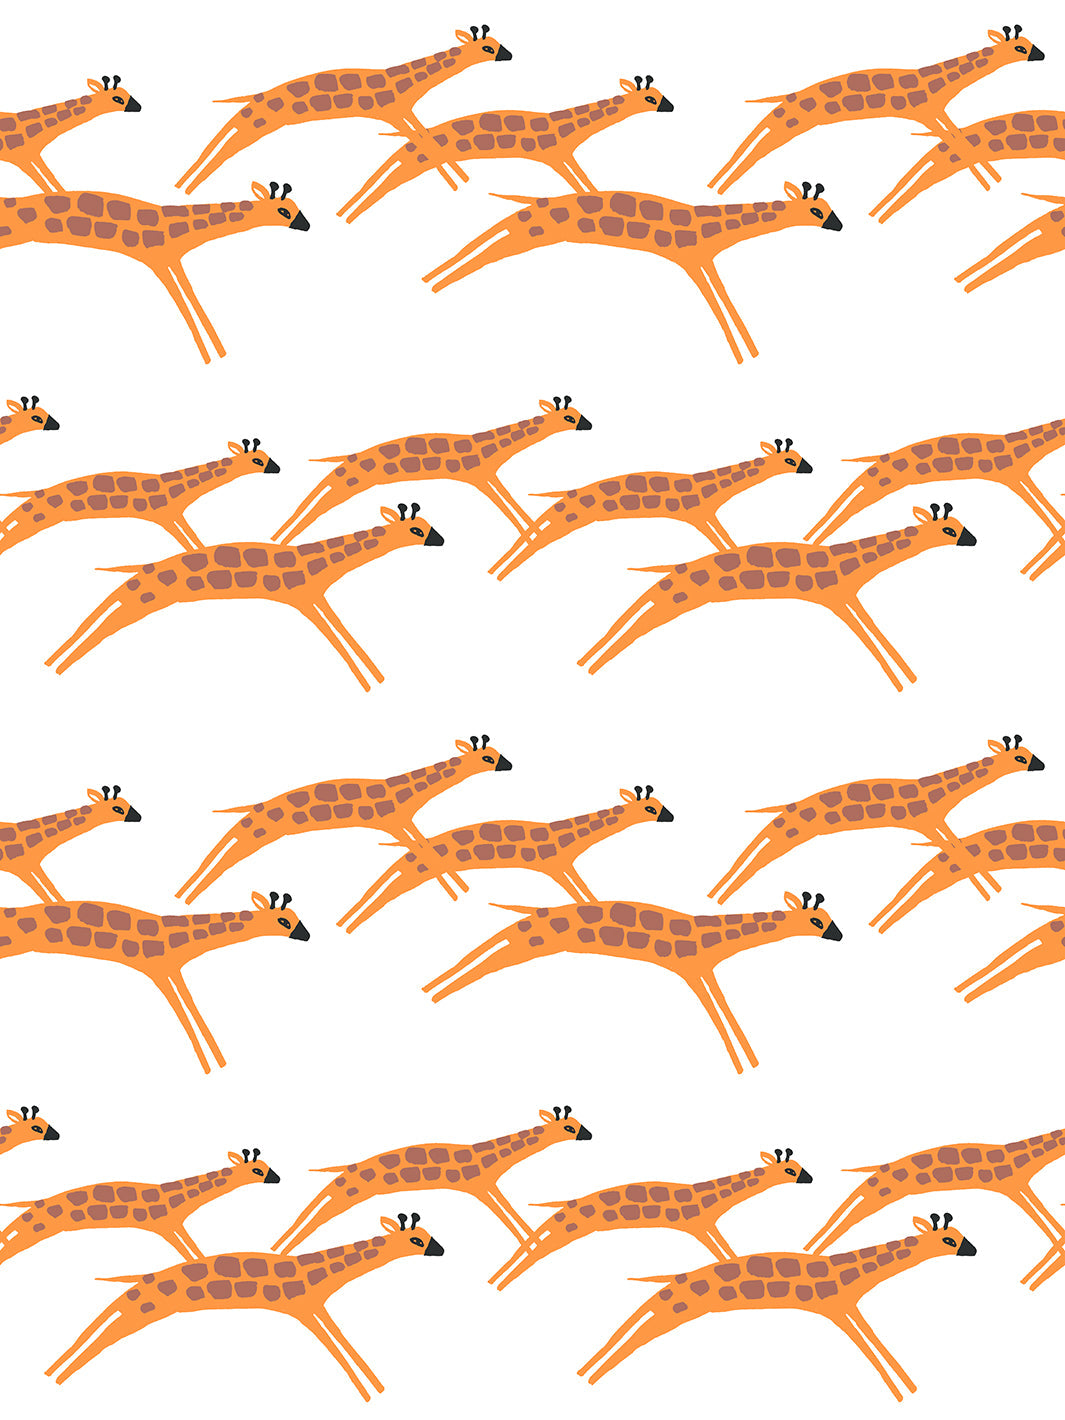 'Galloping Giraffes' Wallpaper by Tea Collection - White